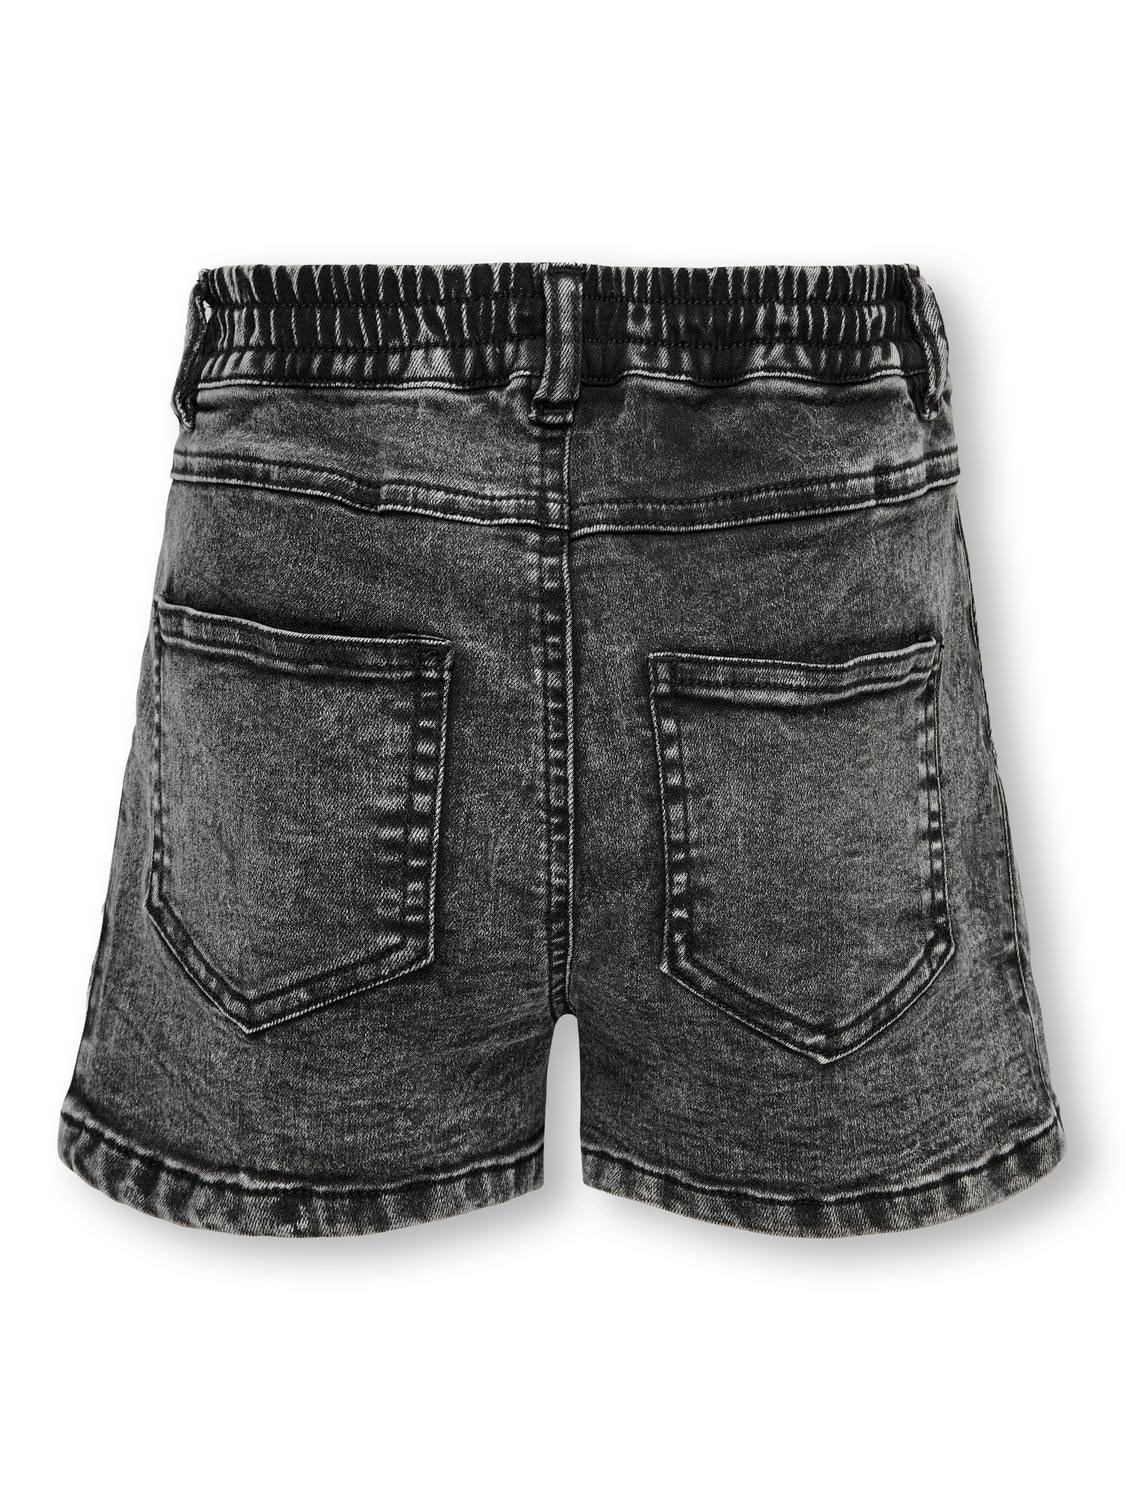 ONLY Skinny Fit Shorts -Washed Black - 15260697